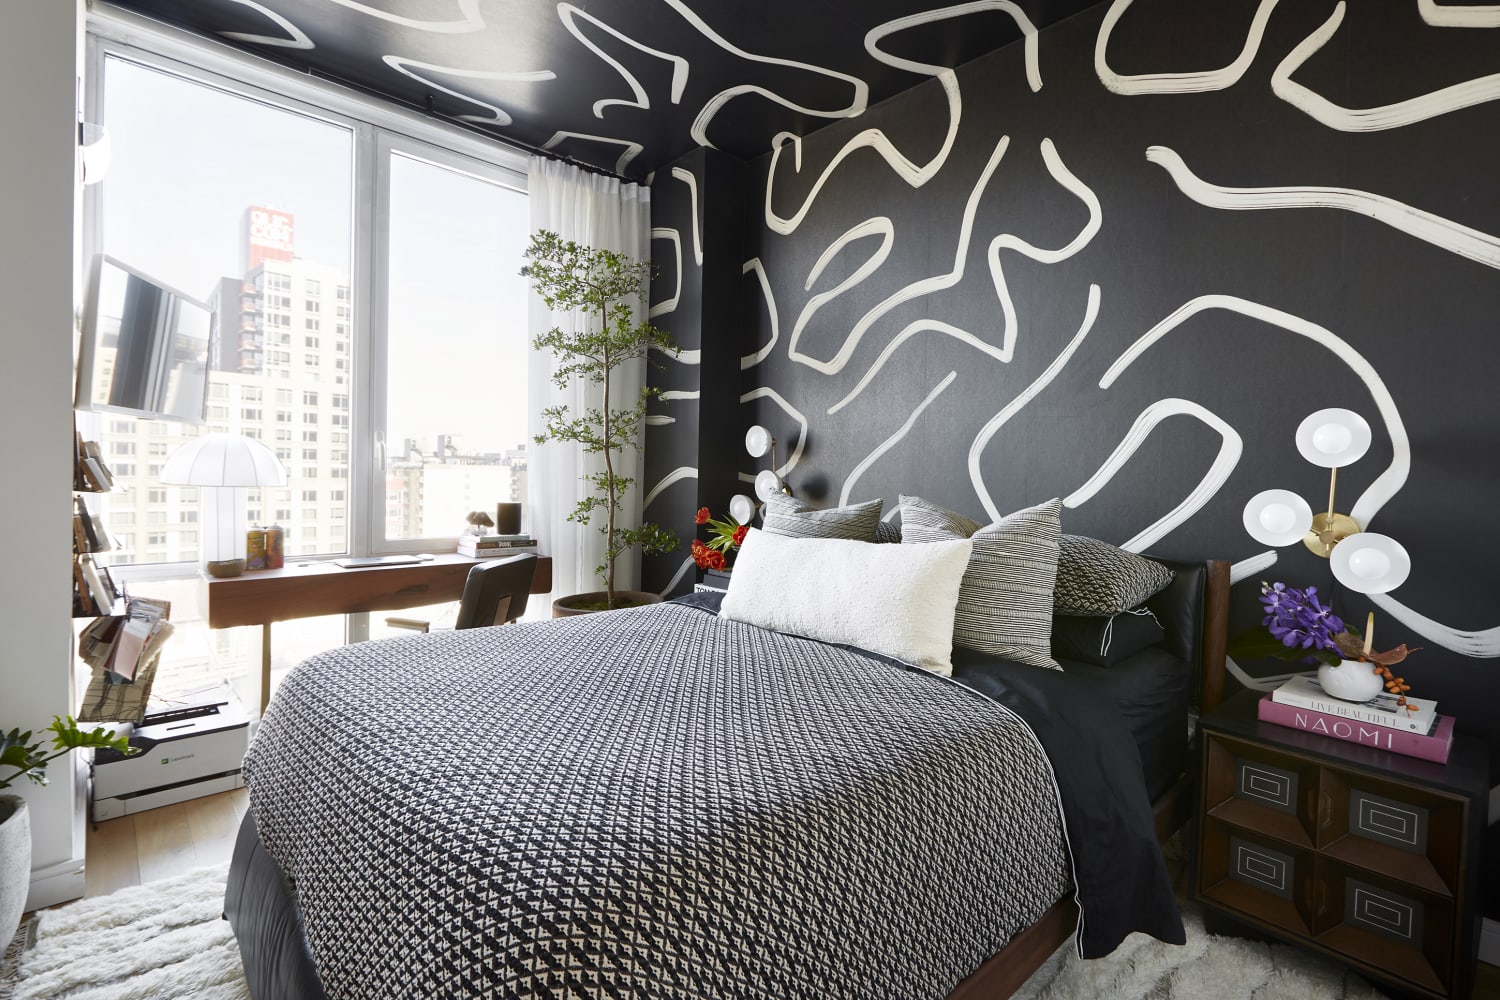 15 Black and White Bedroom Ideas (With Inspiring Photos